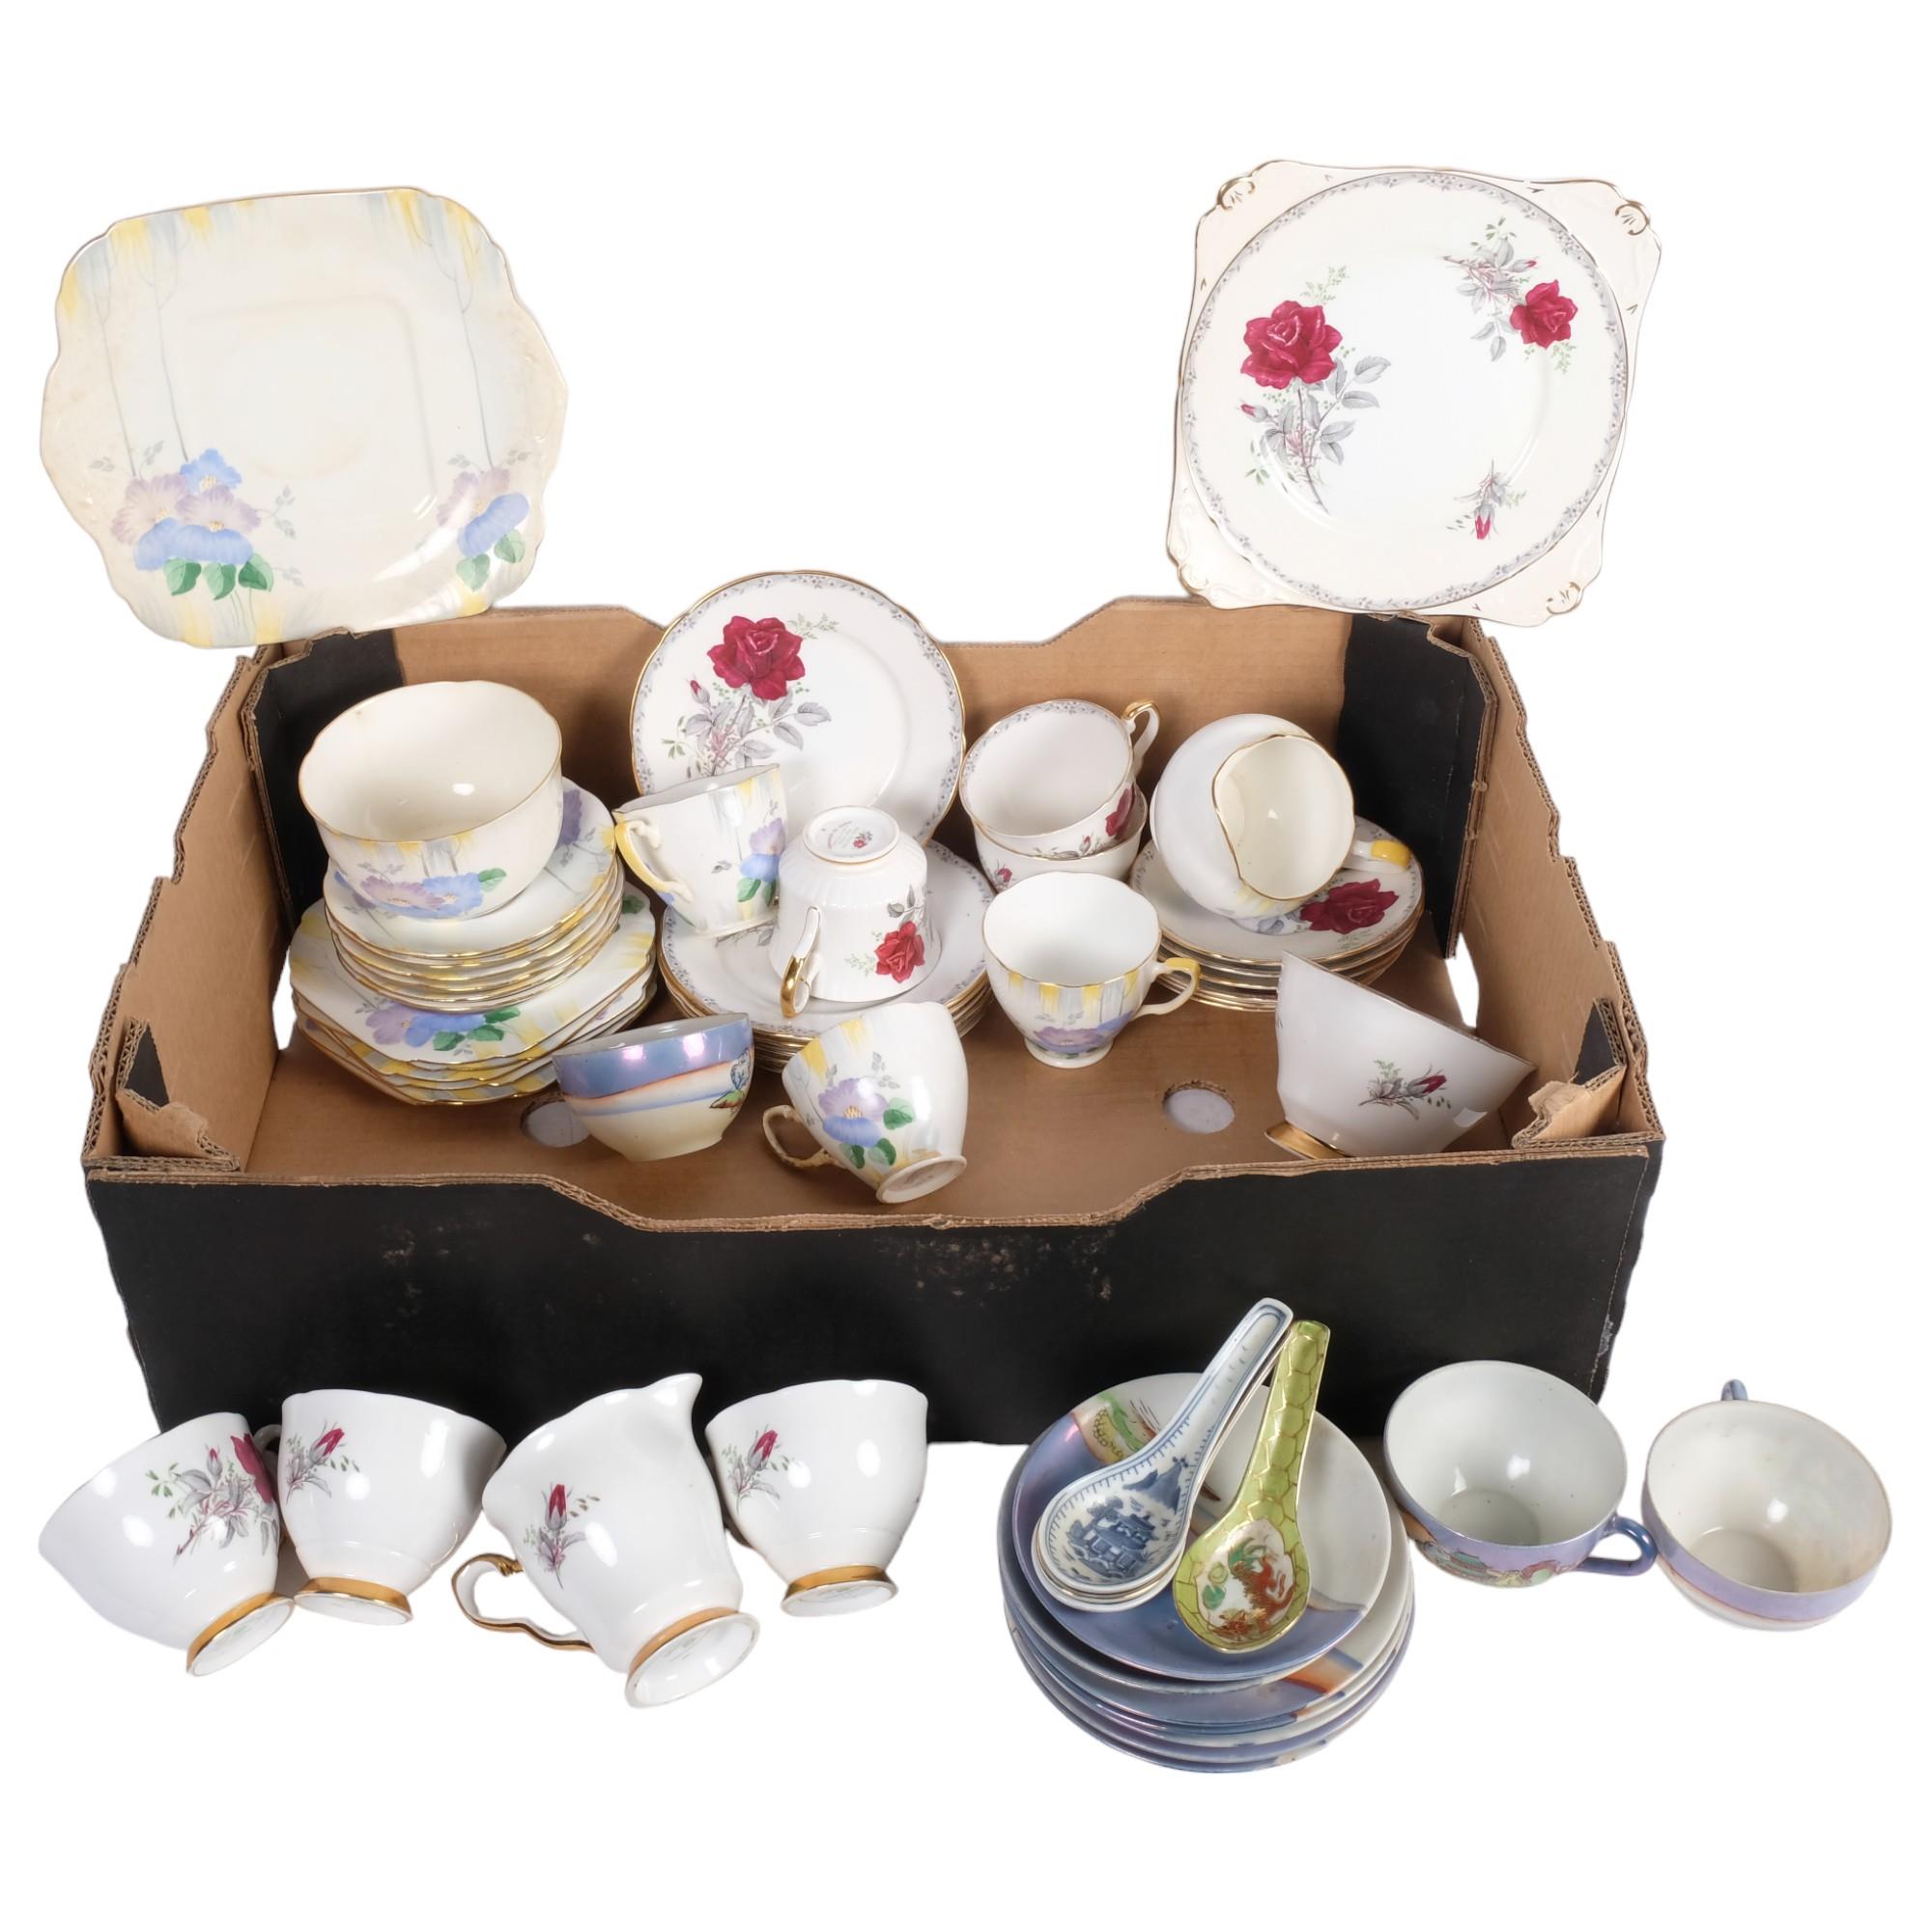 Royal Stafford rose decorated teaware, and other part sets